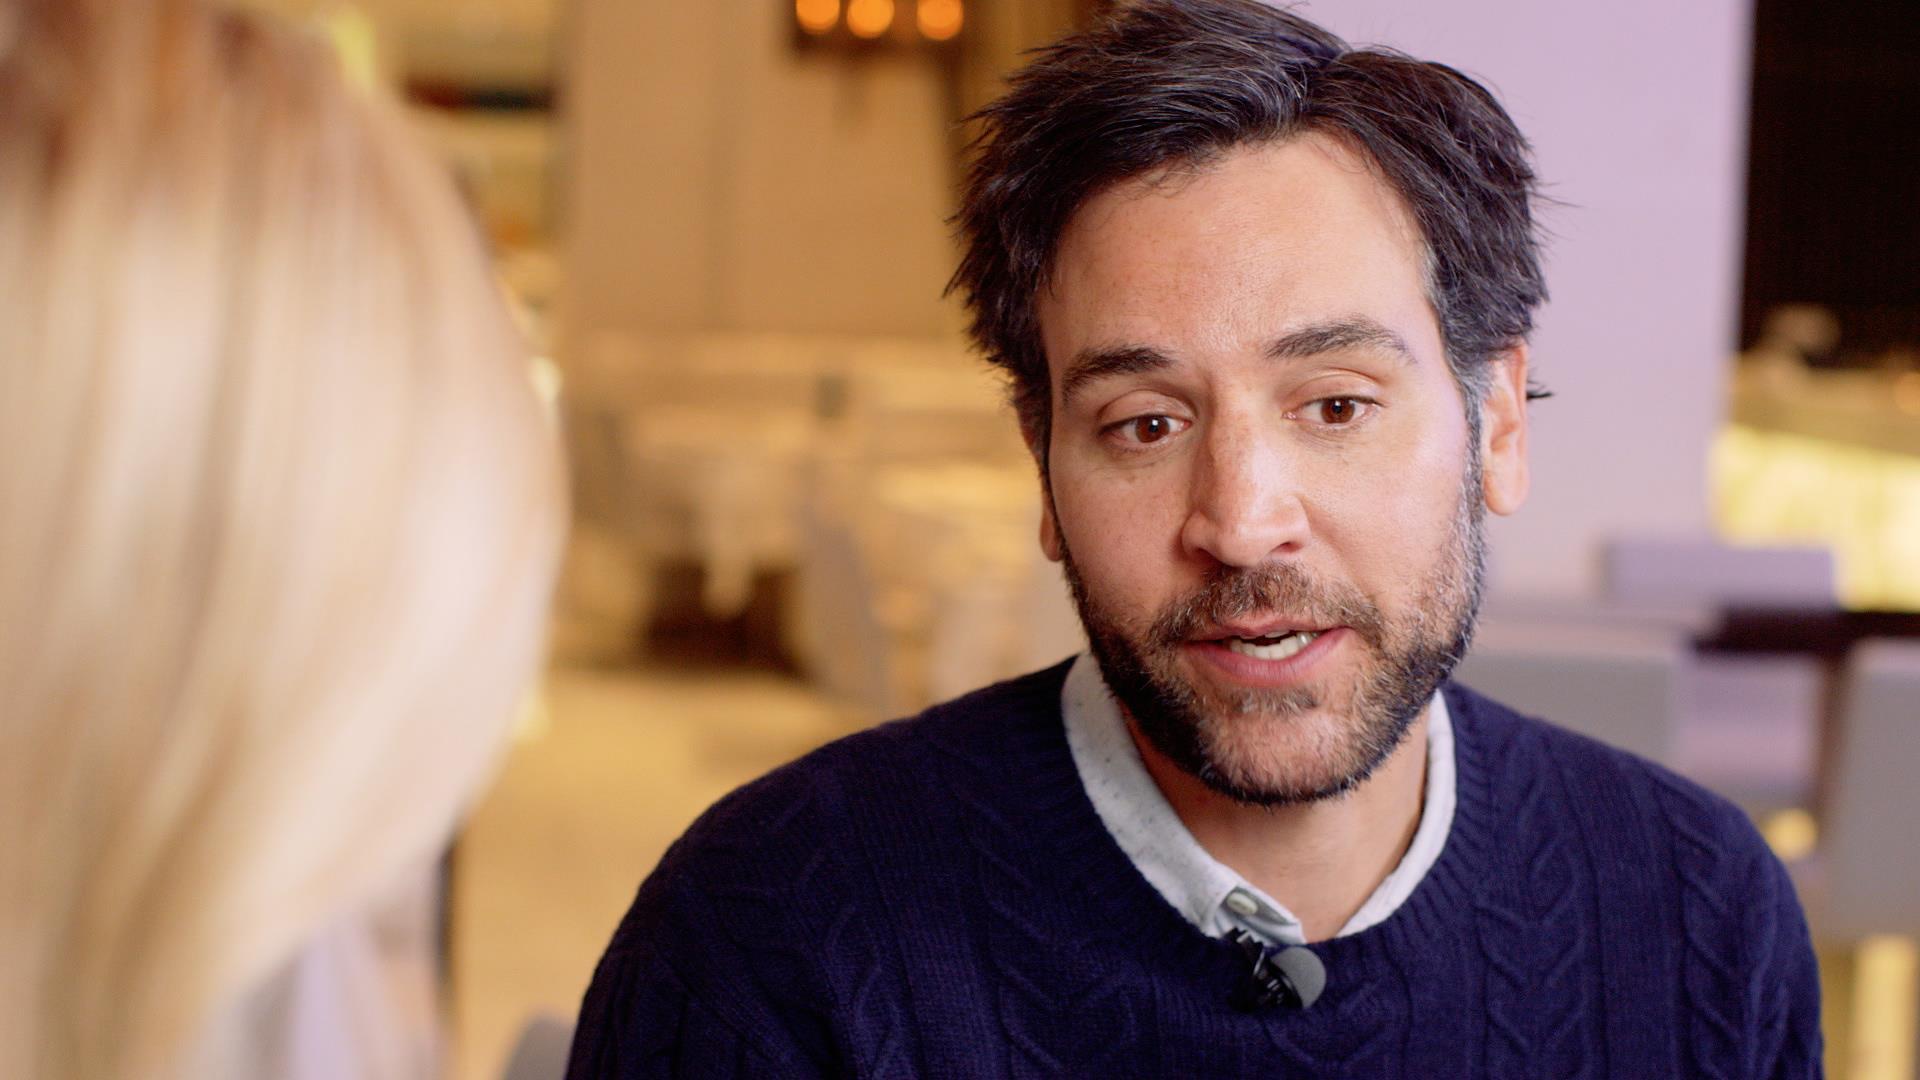 Josh Radnor on Getting Fired: A Blessing in Disguise